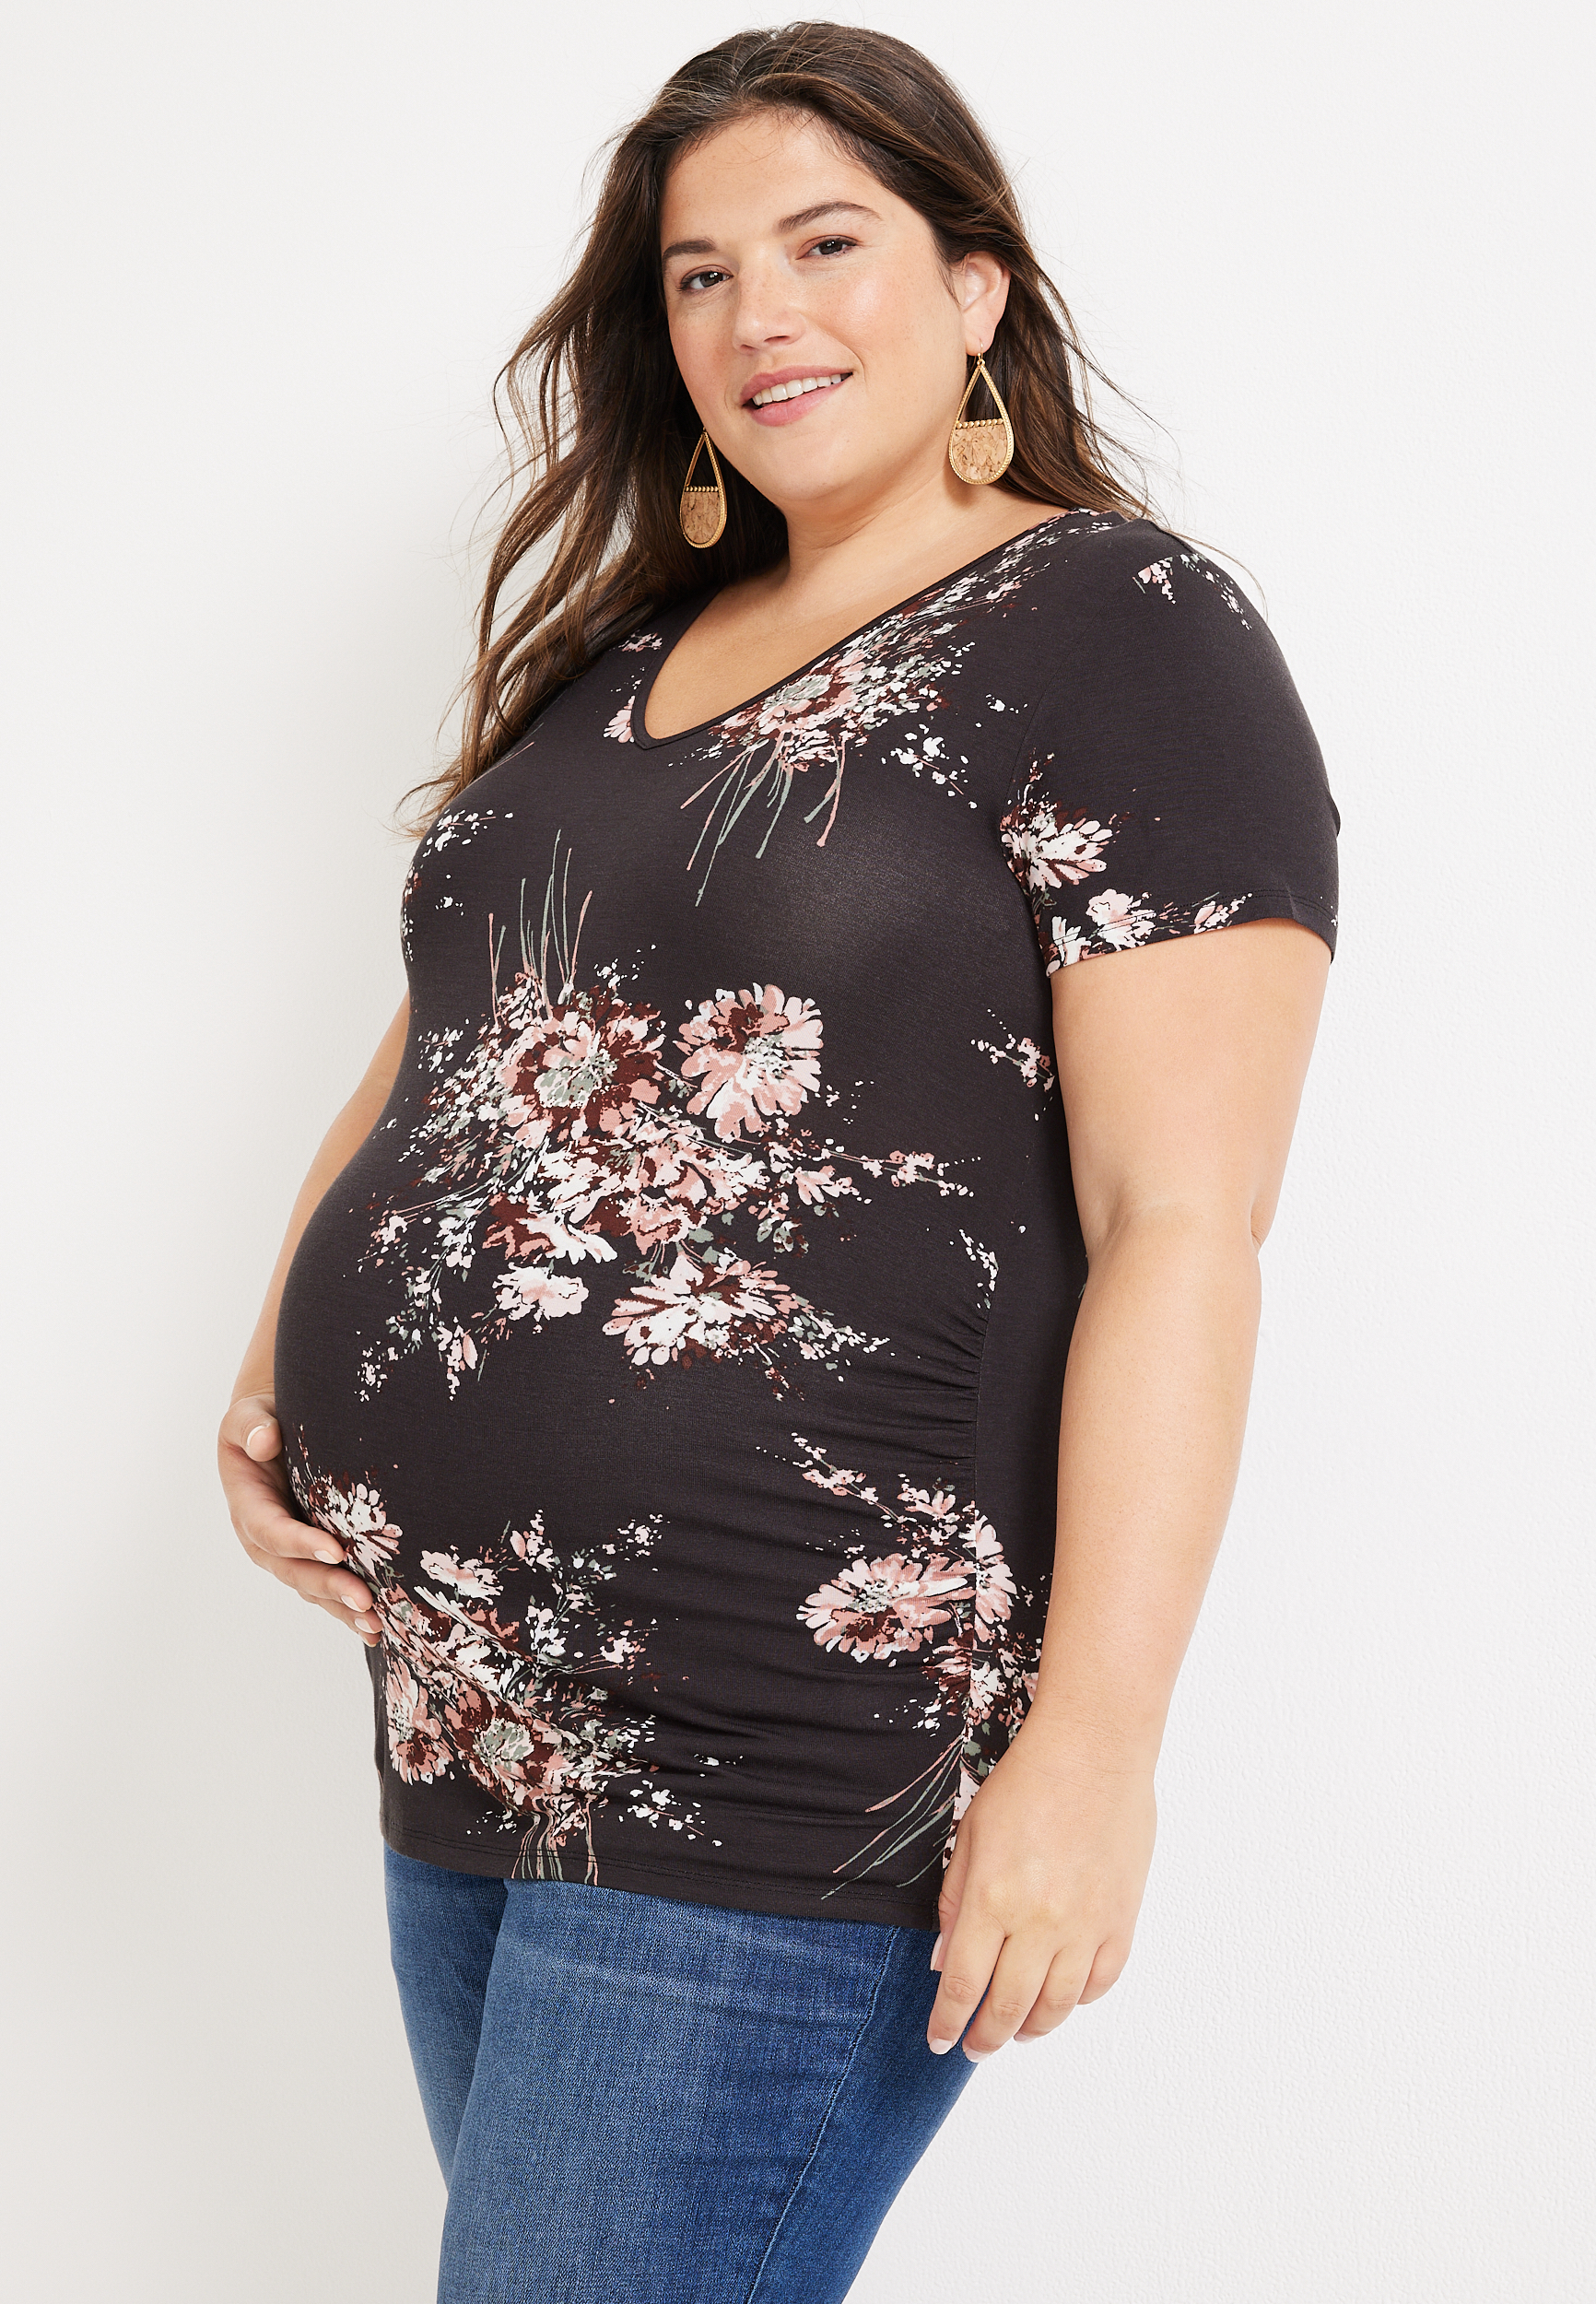 10+ PLACES TO SHOP FOR STYLISH PLUS SIZE MATERNITY CLOTHES